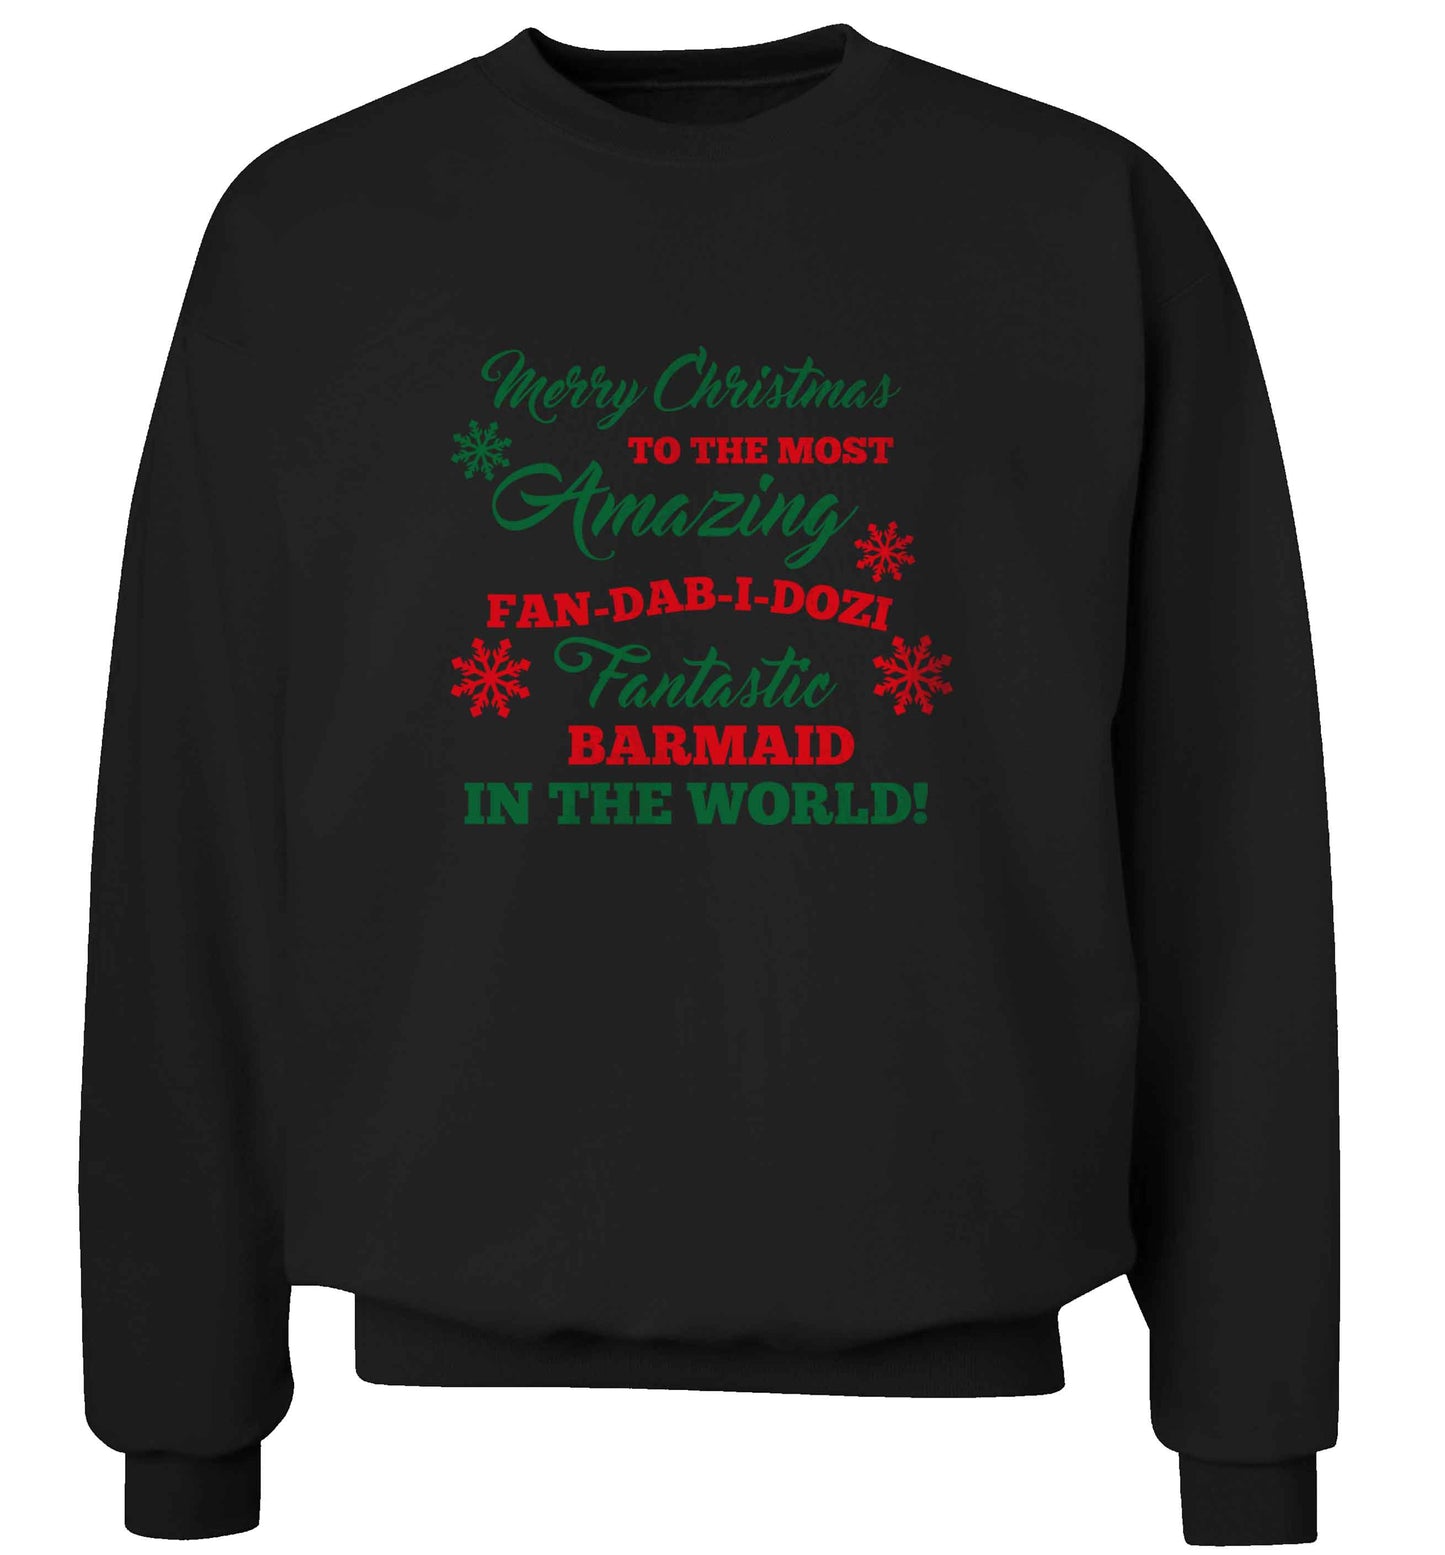 Merry Christmas to the most amazing barmaid in the world! adult's unisex black sweater 2XL